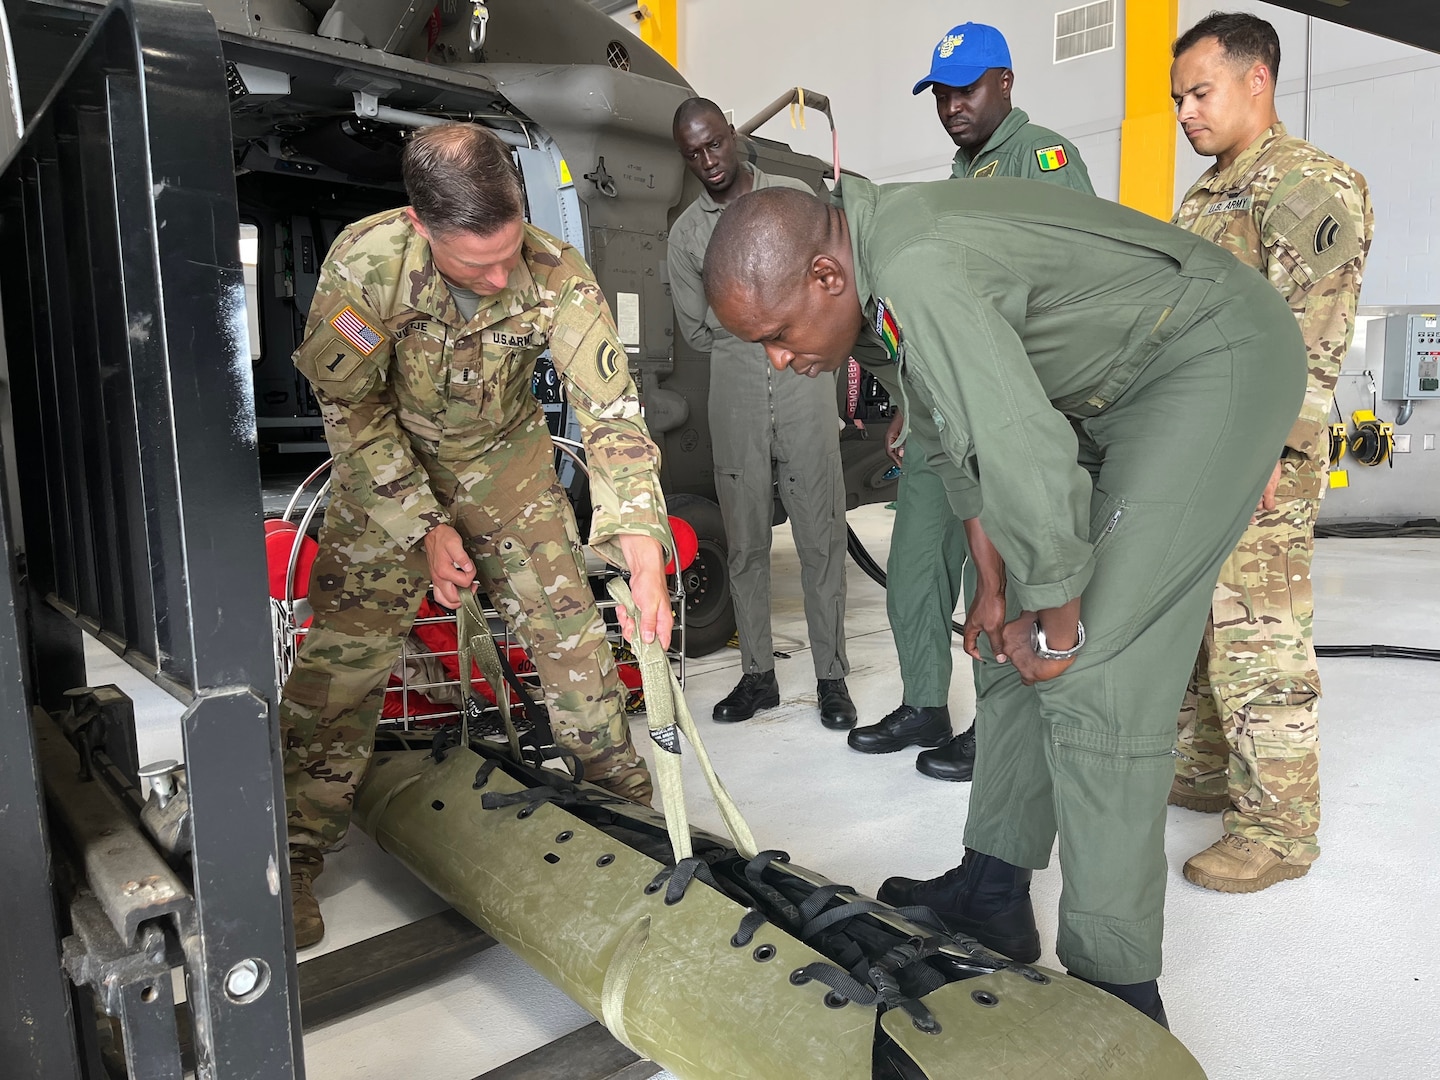 The Vermont Army National Guard hosted three Senegalese Air Force pilots July 17-22,2022, to conduct safety, operations, and maintenance cross-training with VTARNG’s Aviators during a State Partnership Program visit. The Department of Defense’s State Partnership Program pairs U.S. state National Guard units with other nations to facilitate international civil-military relationships. U.S. Army National Guard photo by Sgt. 1st Class Jason Alvarez)